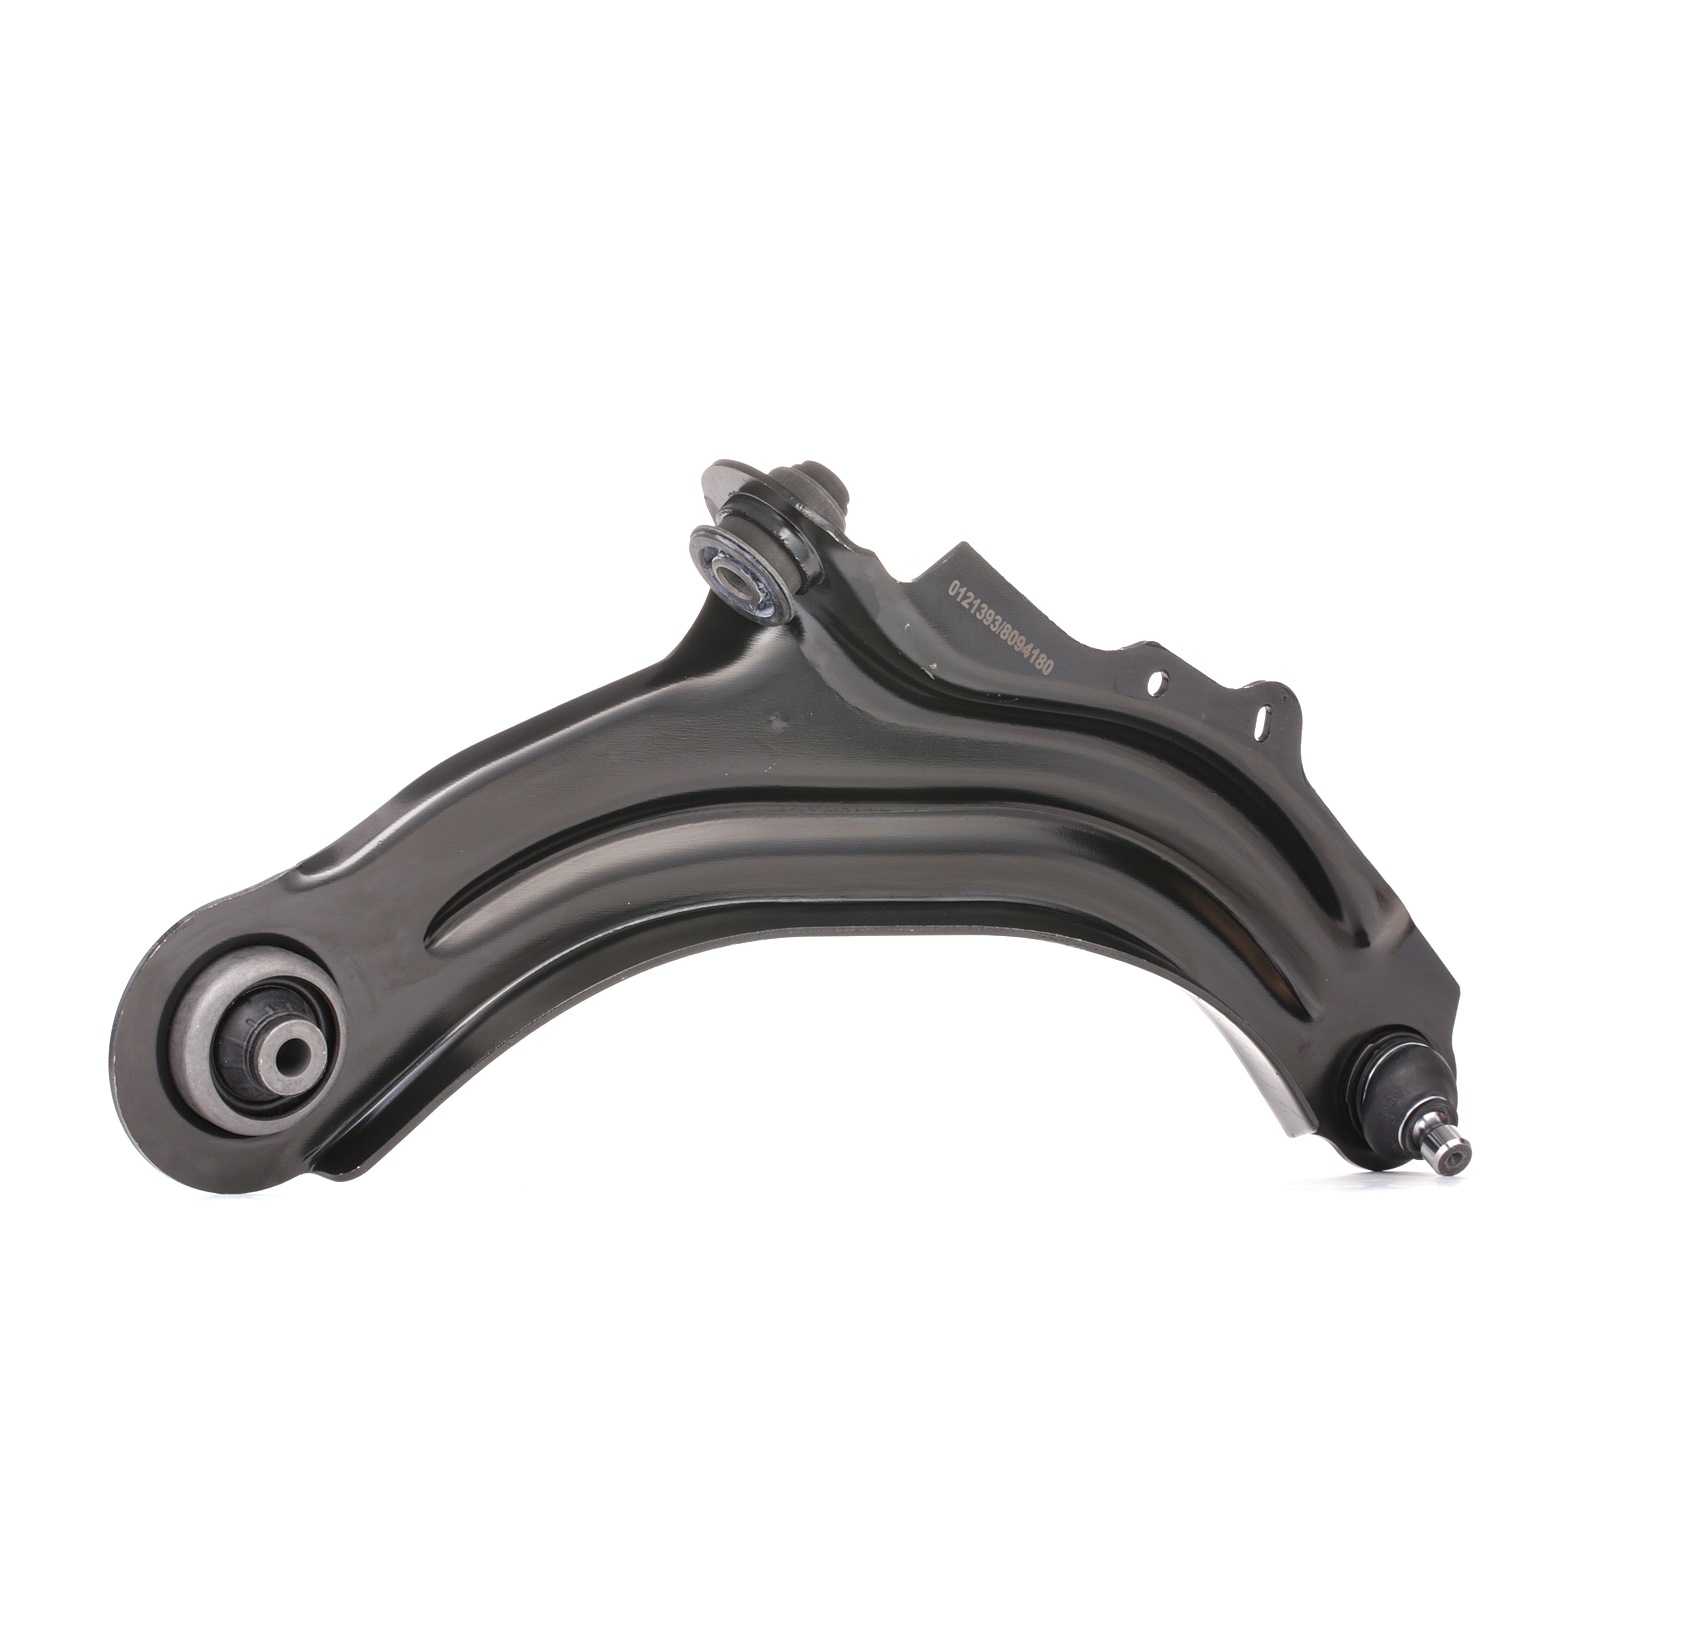 STARK SKCA-0050620 Suspension arm Lower Front Axle, Right, Control Arm, Sheet Steel, Cone Size: 16 mm